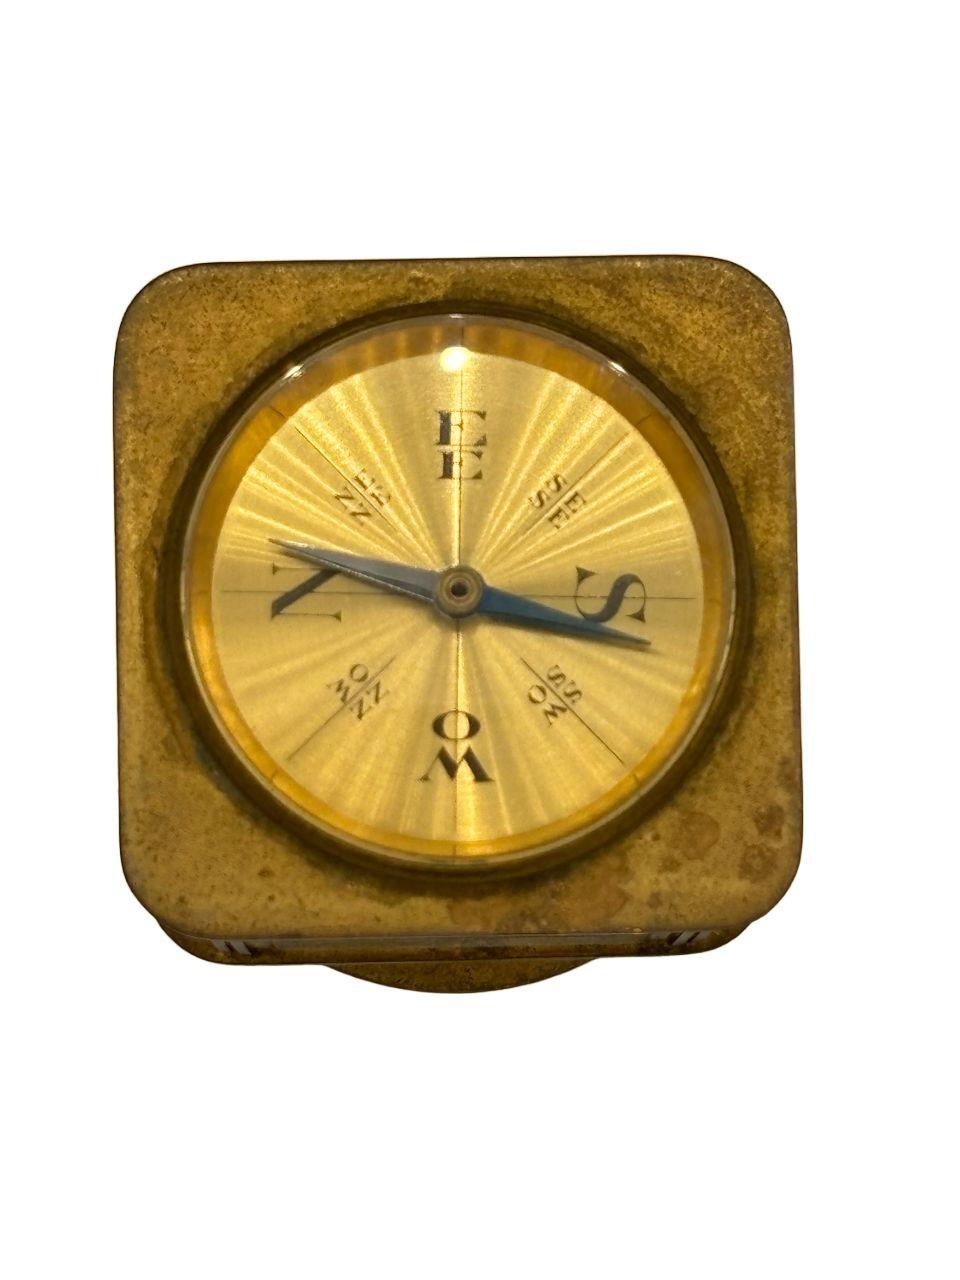 Solid brass Art Deco era desk clock with 8 days movement, with a thermometer, barometer, hygrometer, and compass (in both Celsius and Fahrenheit) by the Angelus Meteo Watch Company

Circa 1930s, by Angelus Meteo, Switzerland


This unique clock and